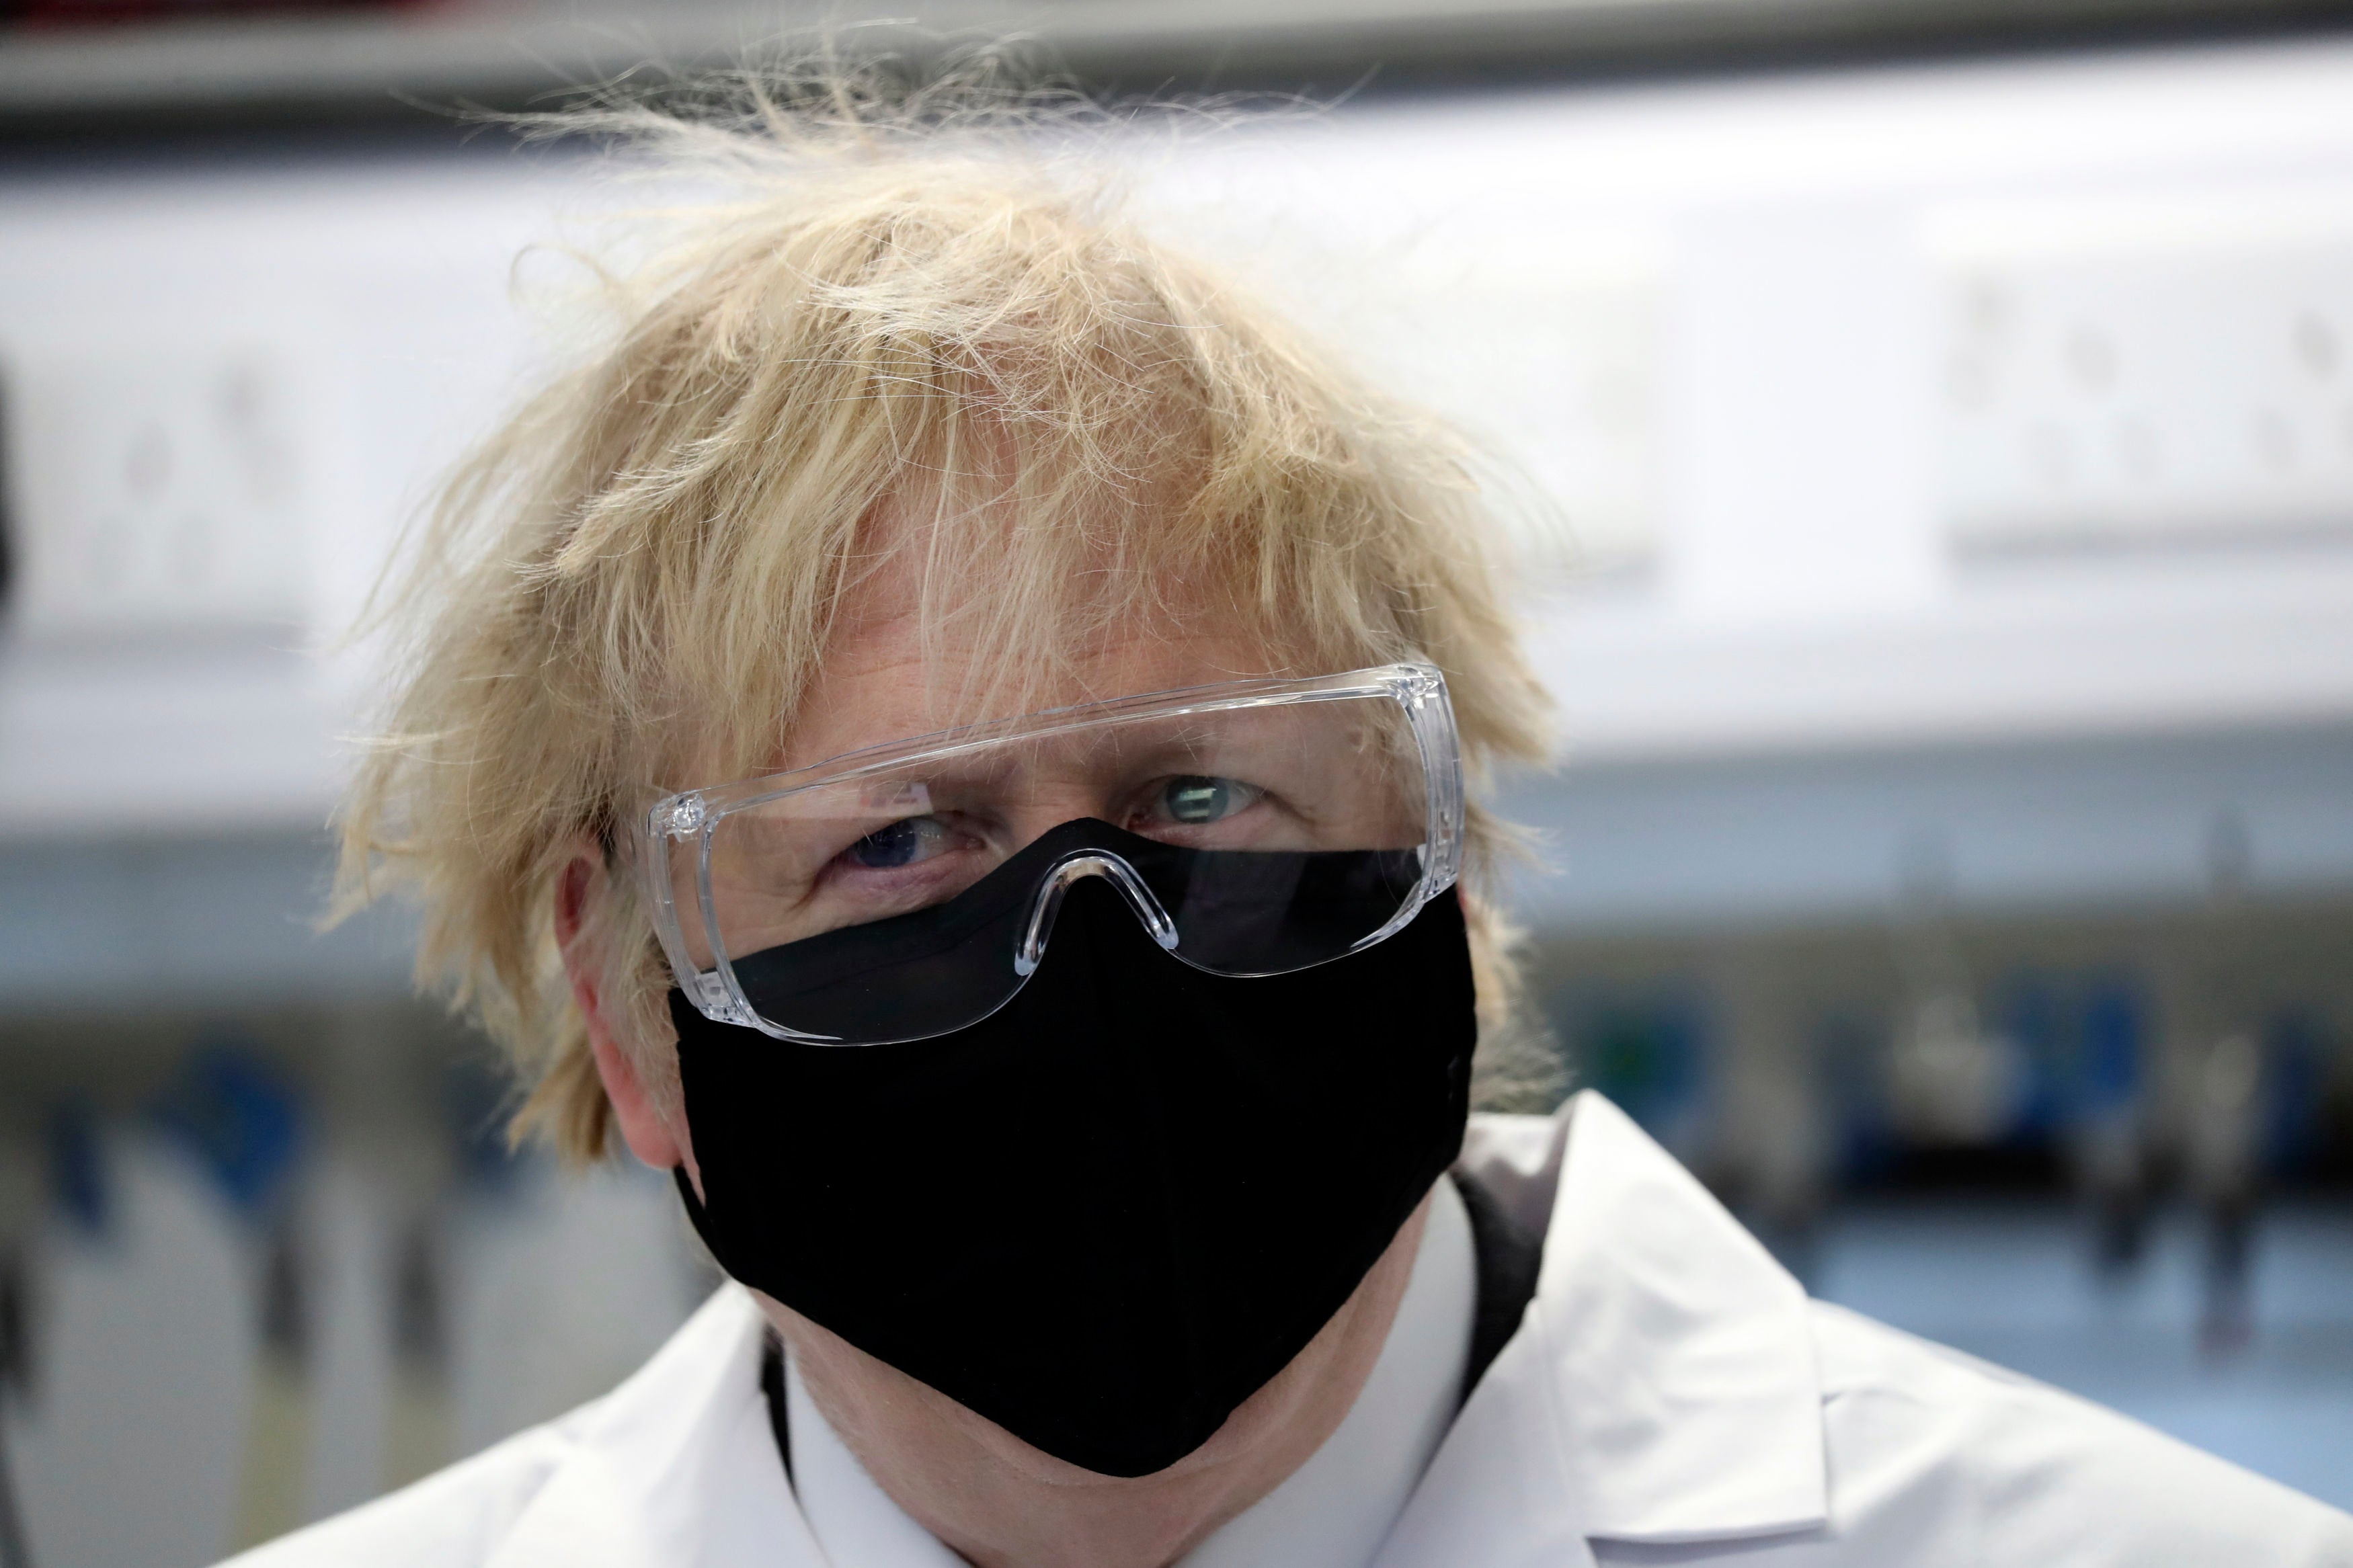 Boris Johnson, wearing a face mask, during a visit to a pharmaceutical manufacturing facility in Stockton-on-Tees